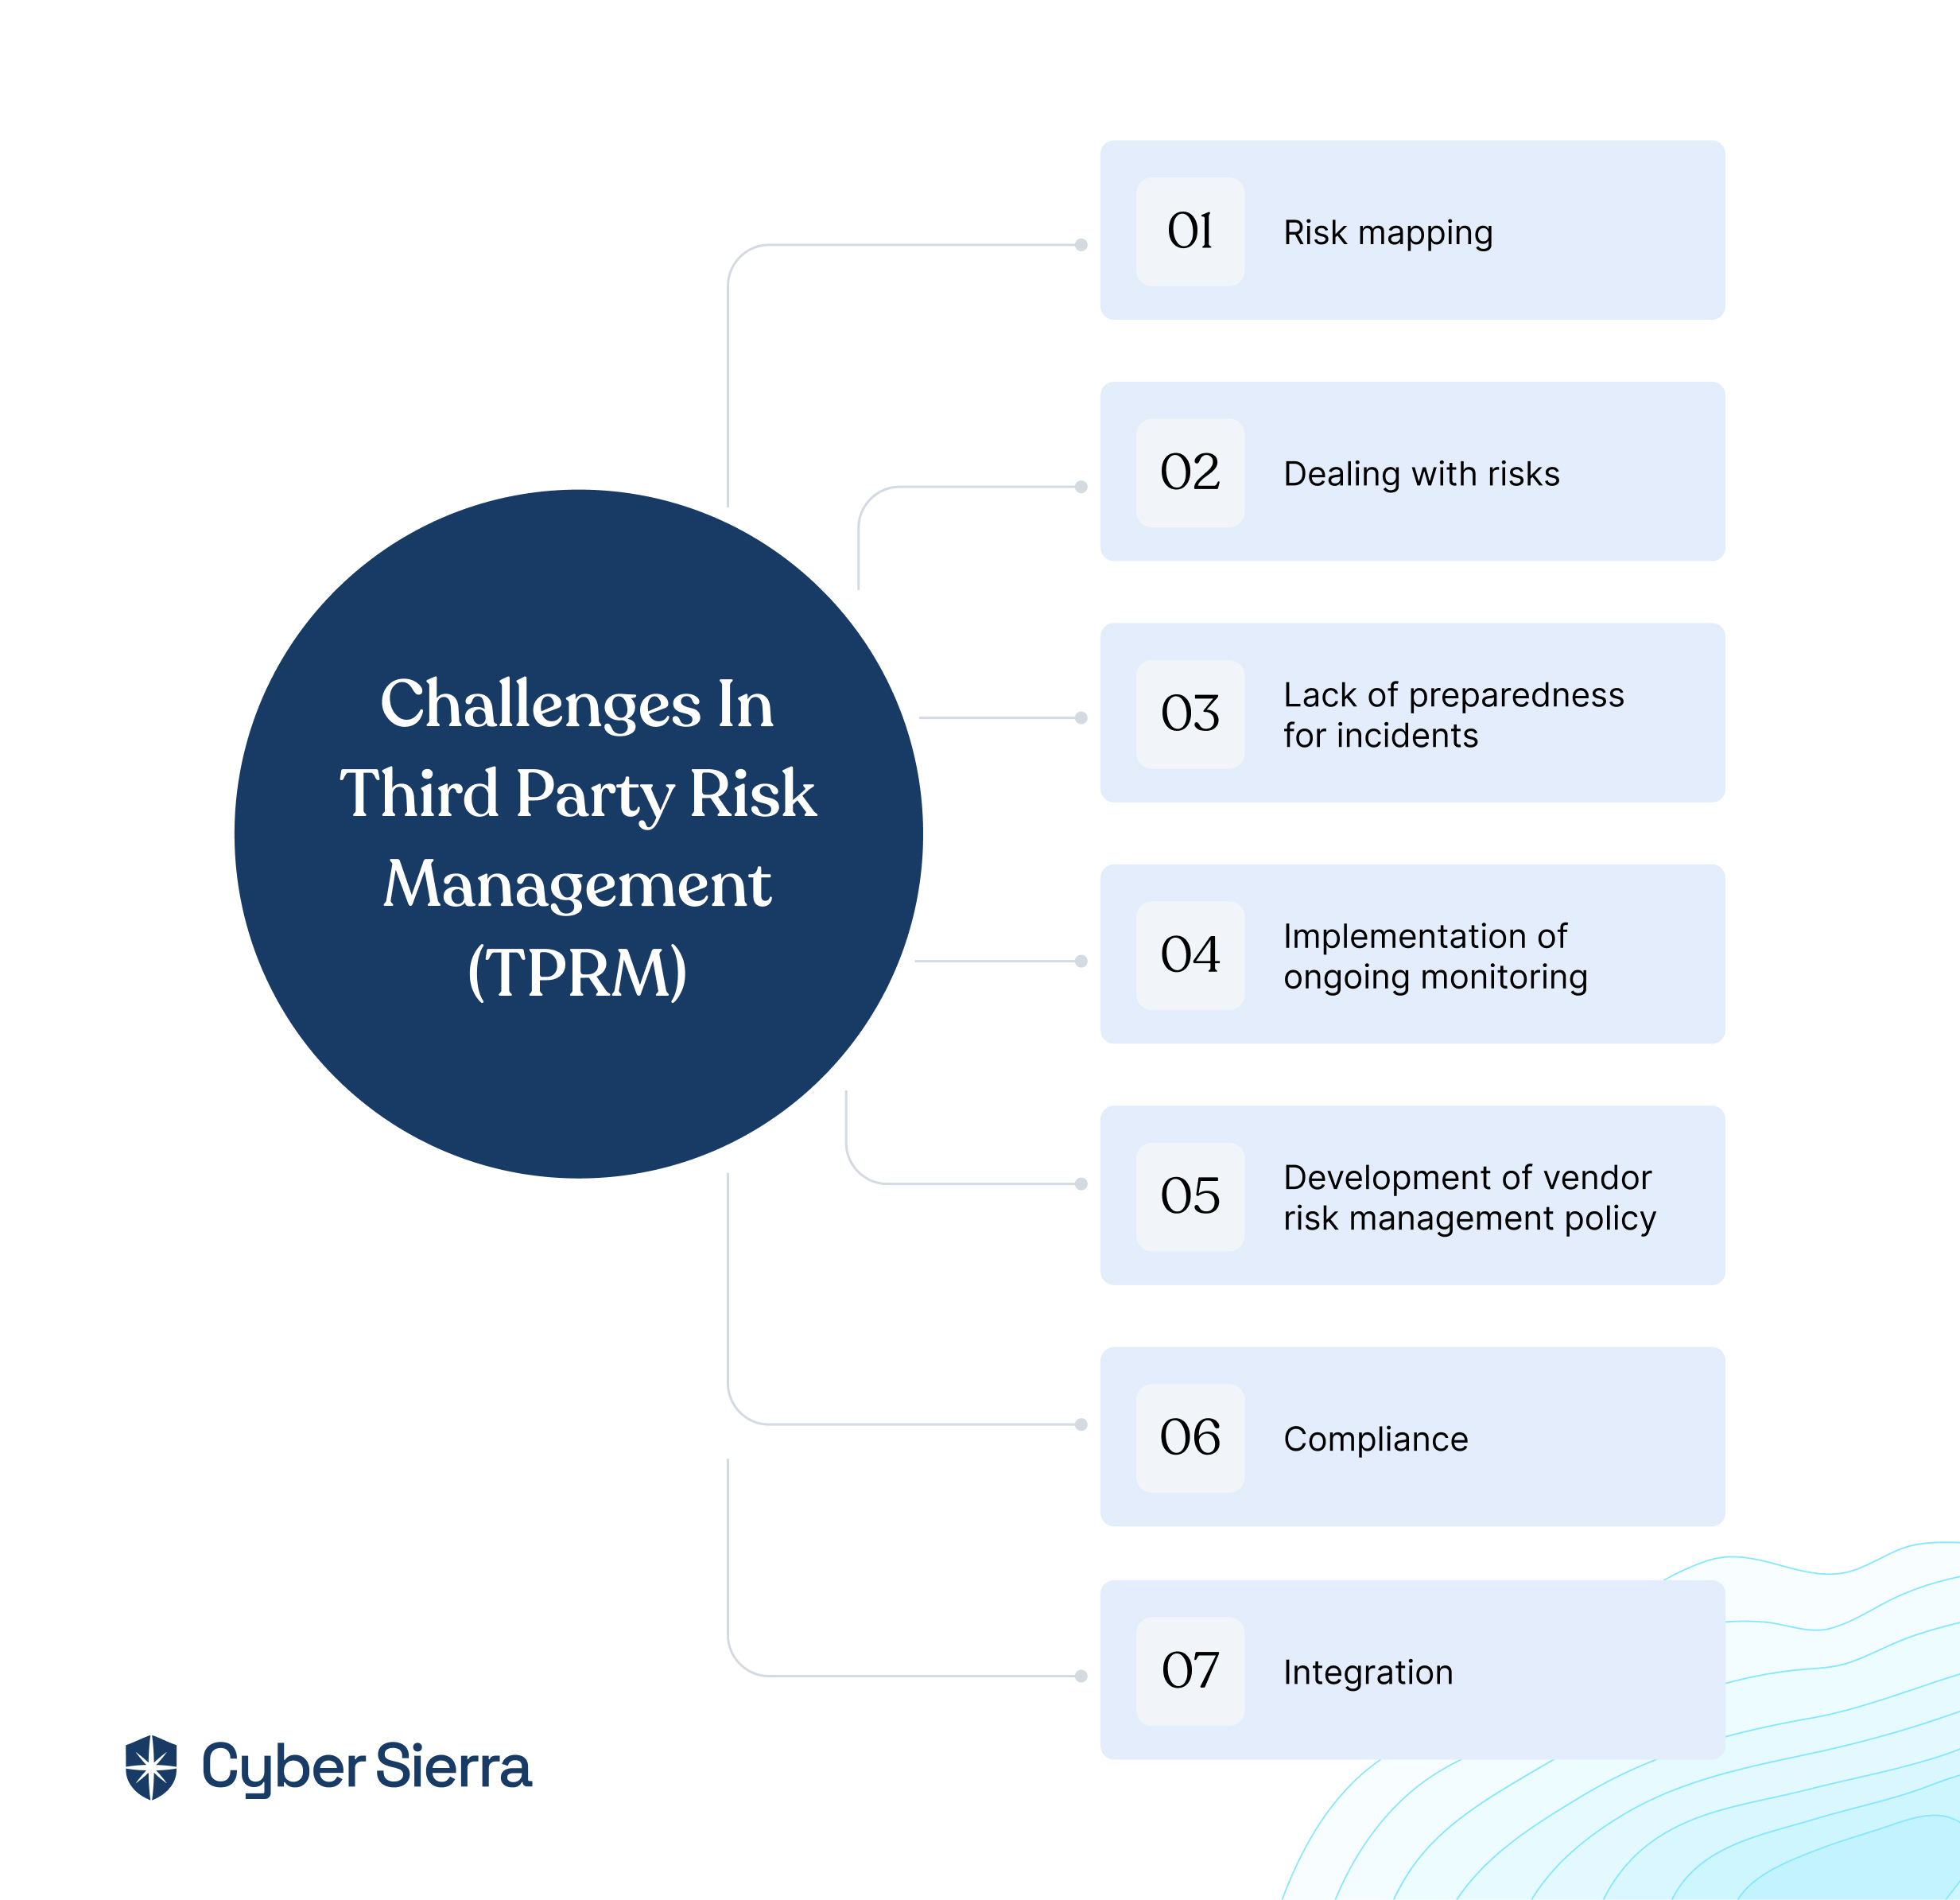 Challenges in Third Party Risk Management (TPRM)